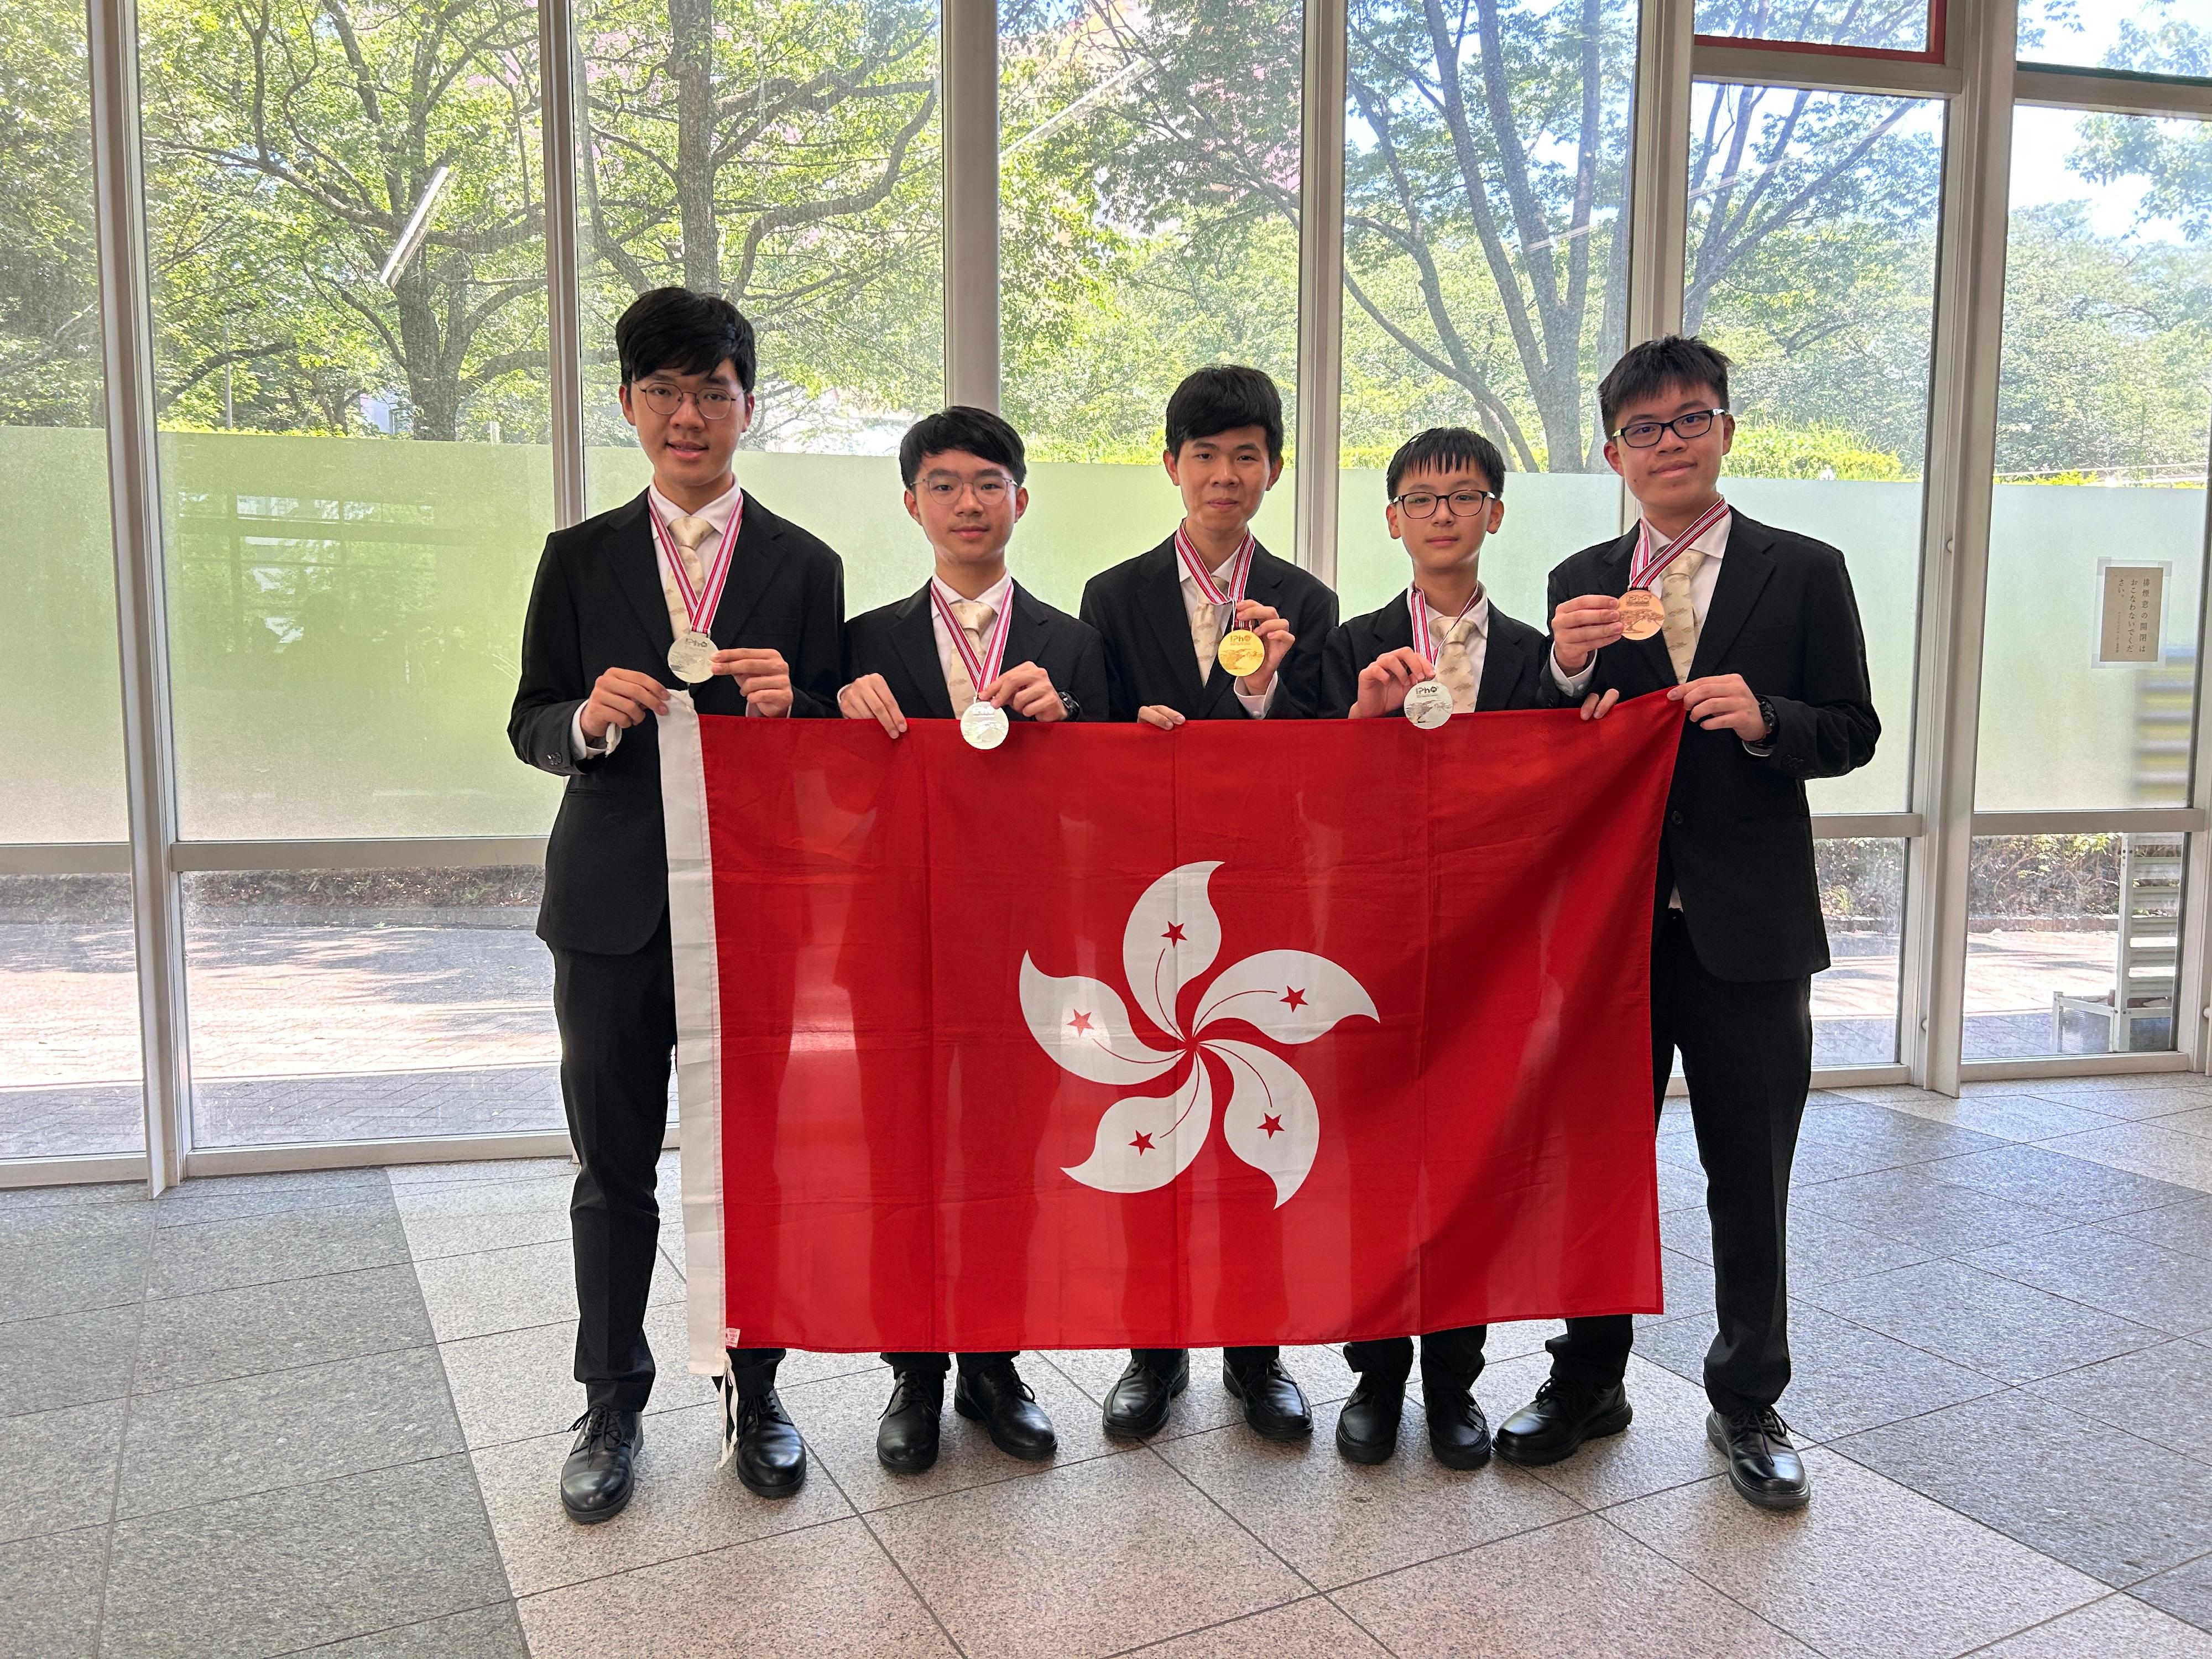 Five students representing Hong Kong achieved remarkable results in the 53rd International Physics Olympiad which was held in Japan from July 10 to 17. They are (from left) Kwok Ching-yeung, Hui Pok-shing, Lam Chung-wang, Liu Lincoln and Kwok Tsz-yin.
